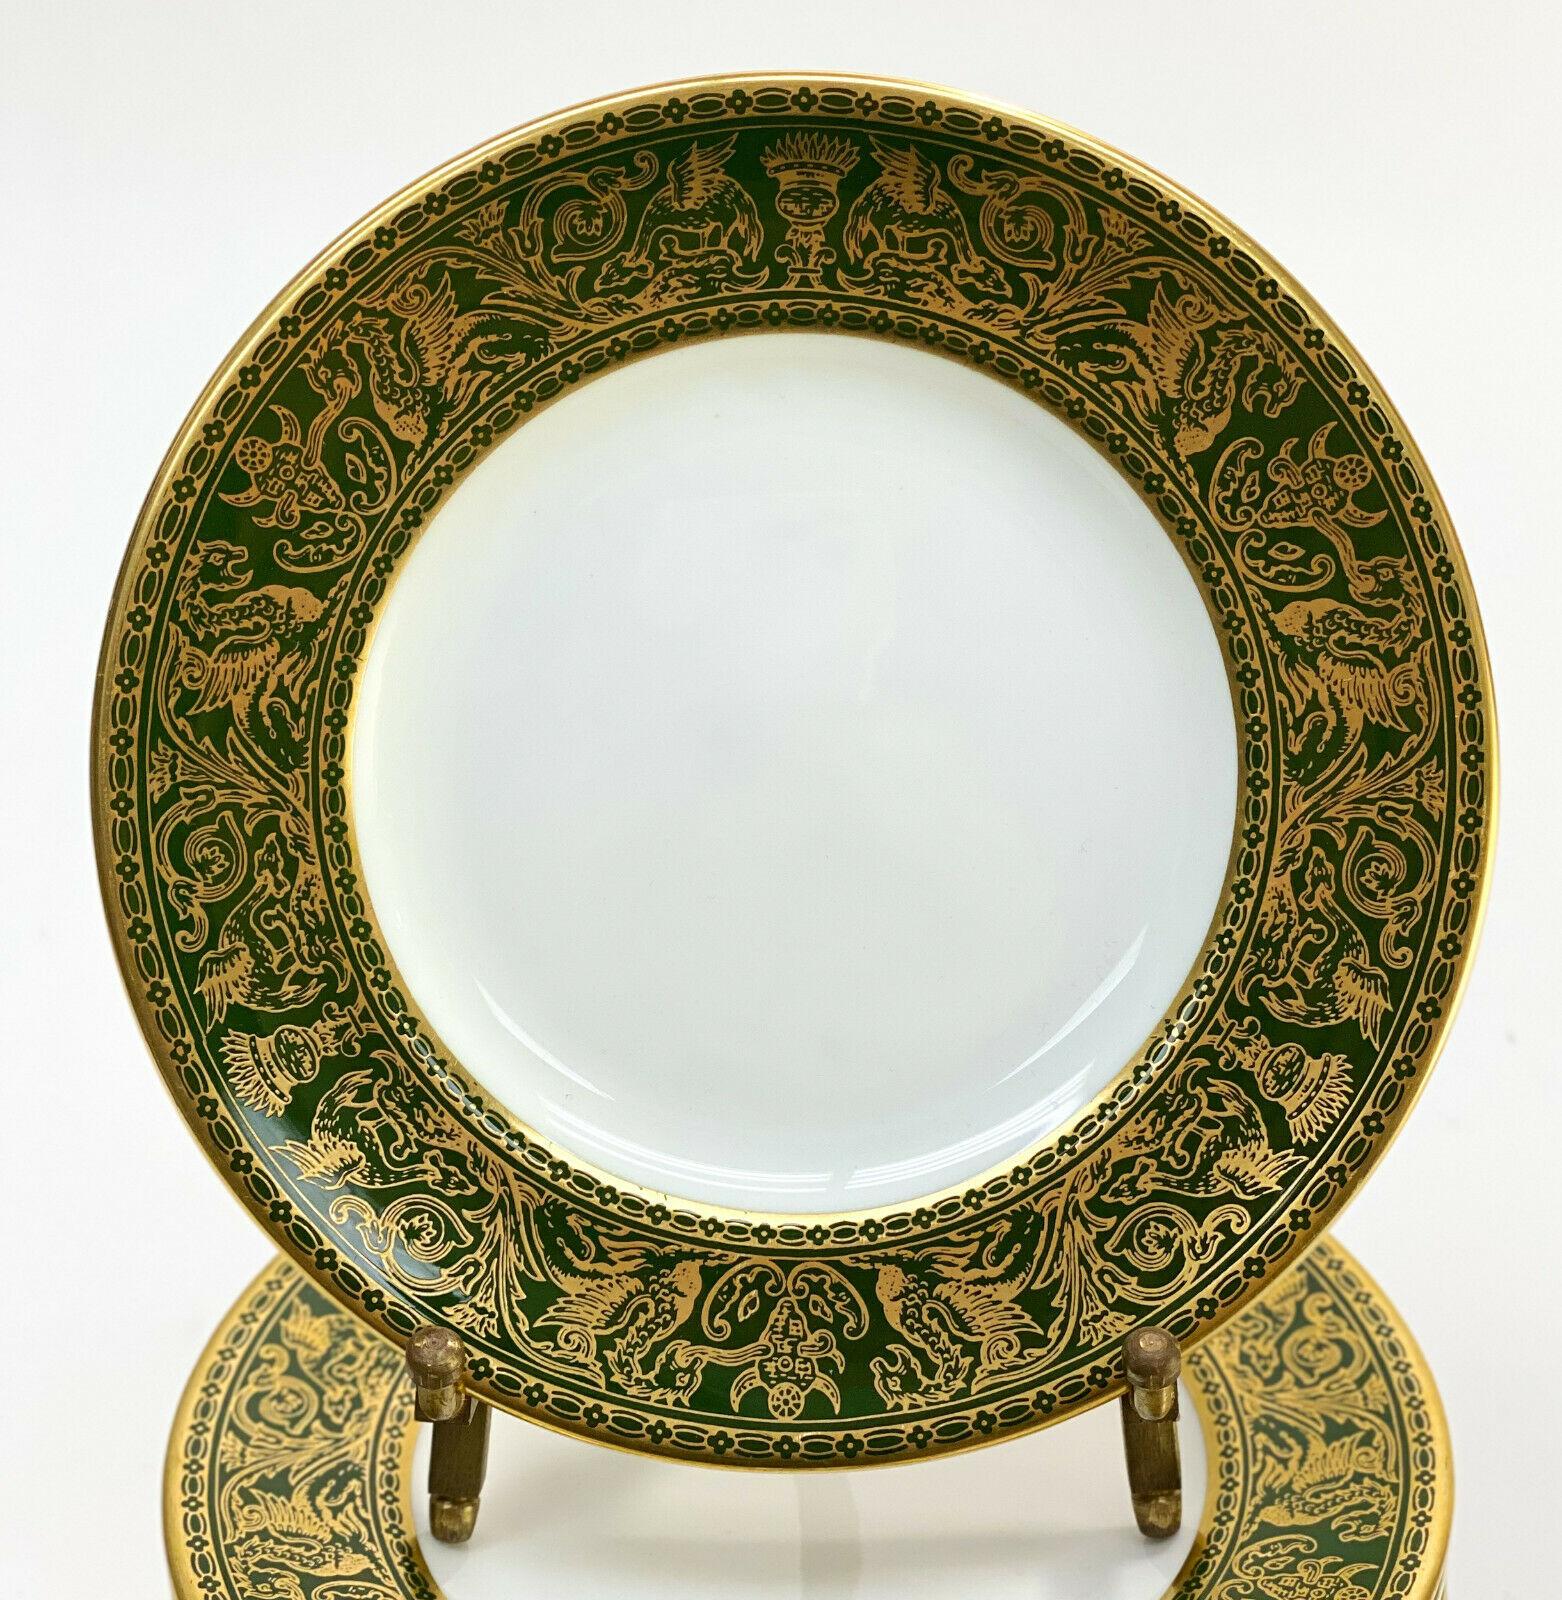 Set of 15 Wedgwood England Porcelain Bread plates in Green Florentine, c1960

circa 1960. A hunter green ground to the rims with gilt dragons and foliate scrolls throughout. Wedgwood England mark to the underside base.

Additional